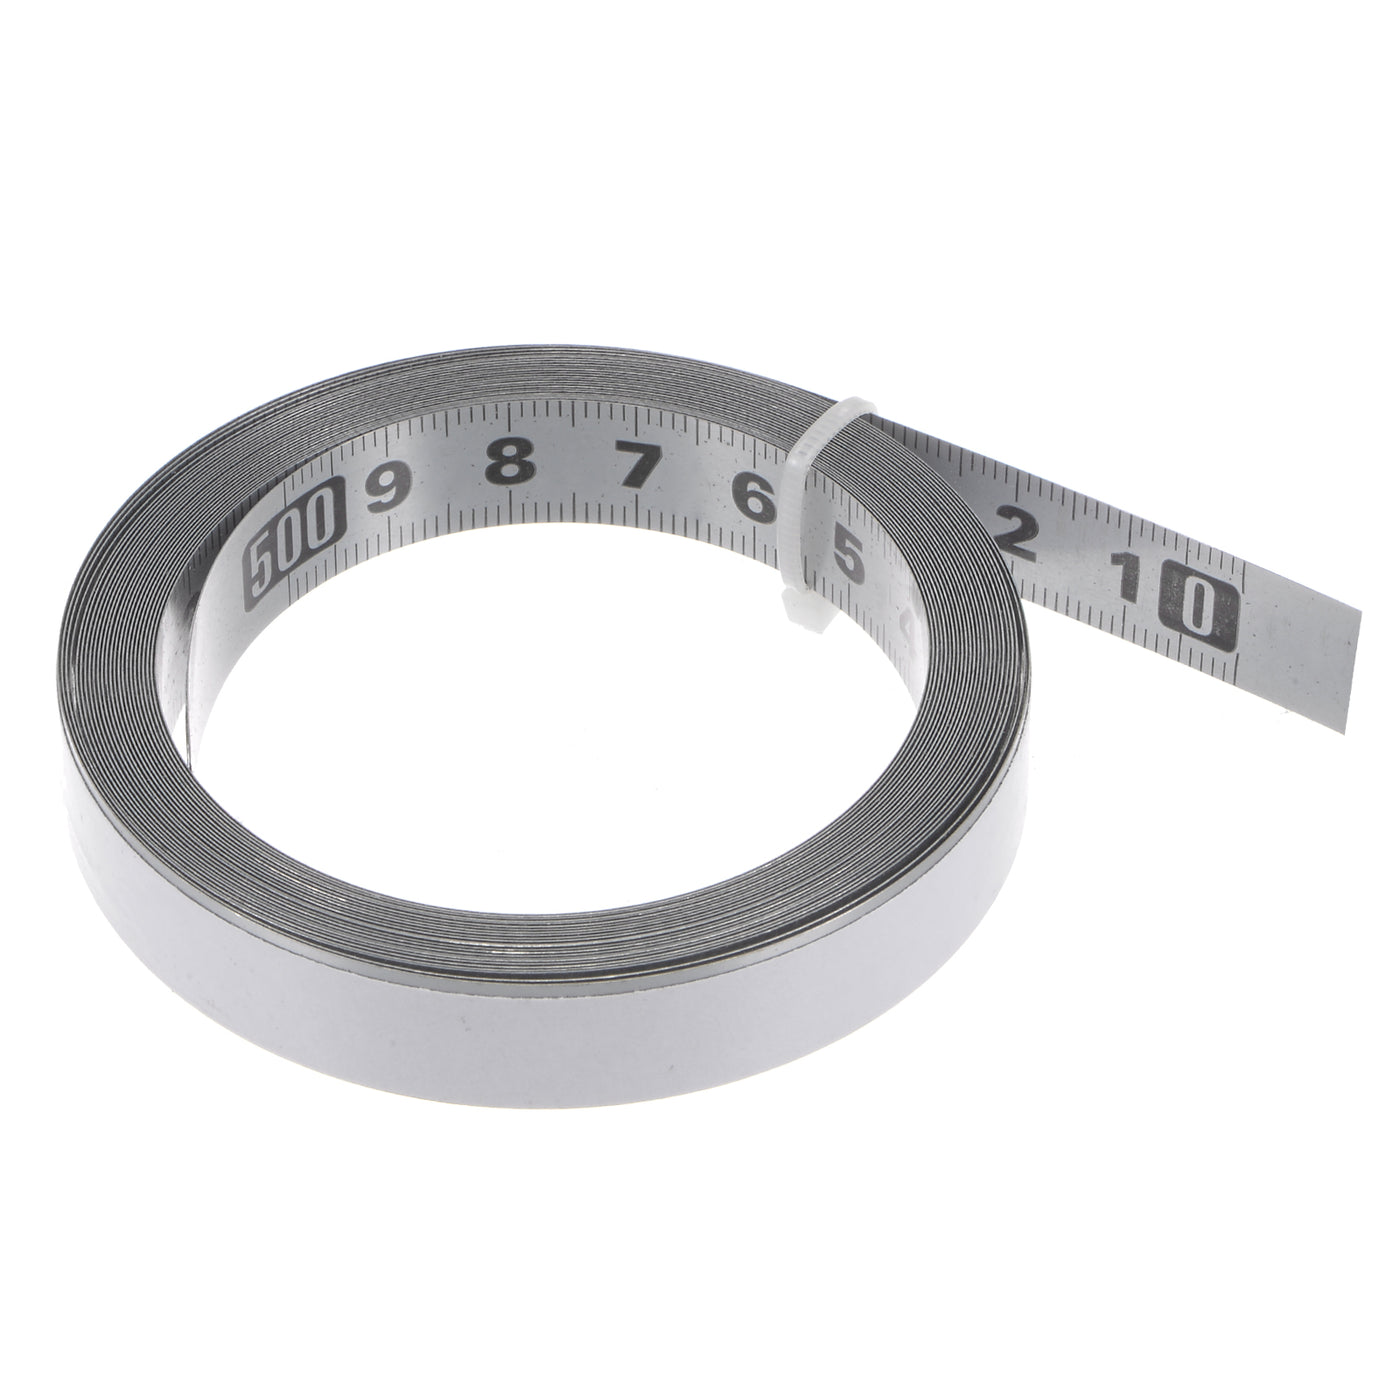 Self Adhesive Tape Measure 100cm Start from Middle Steel Ruler